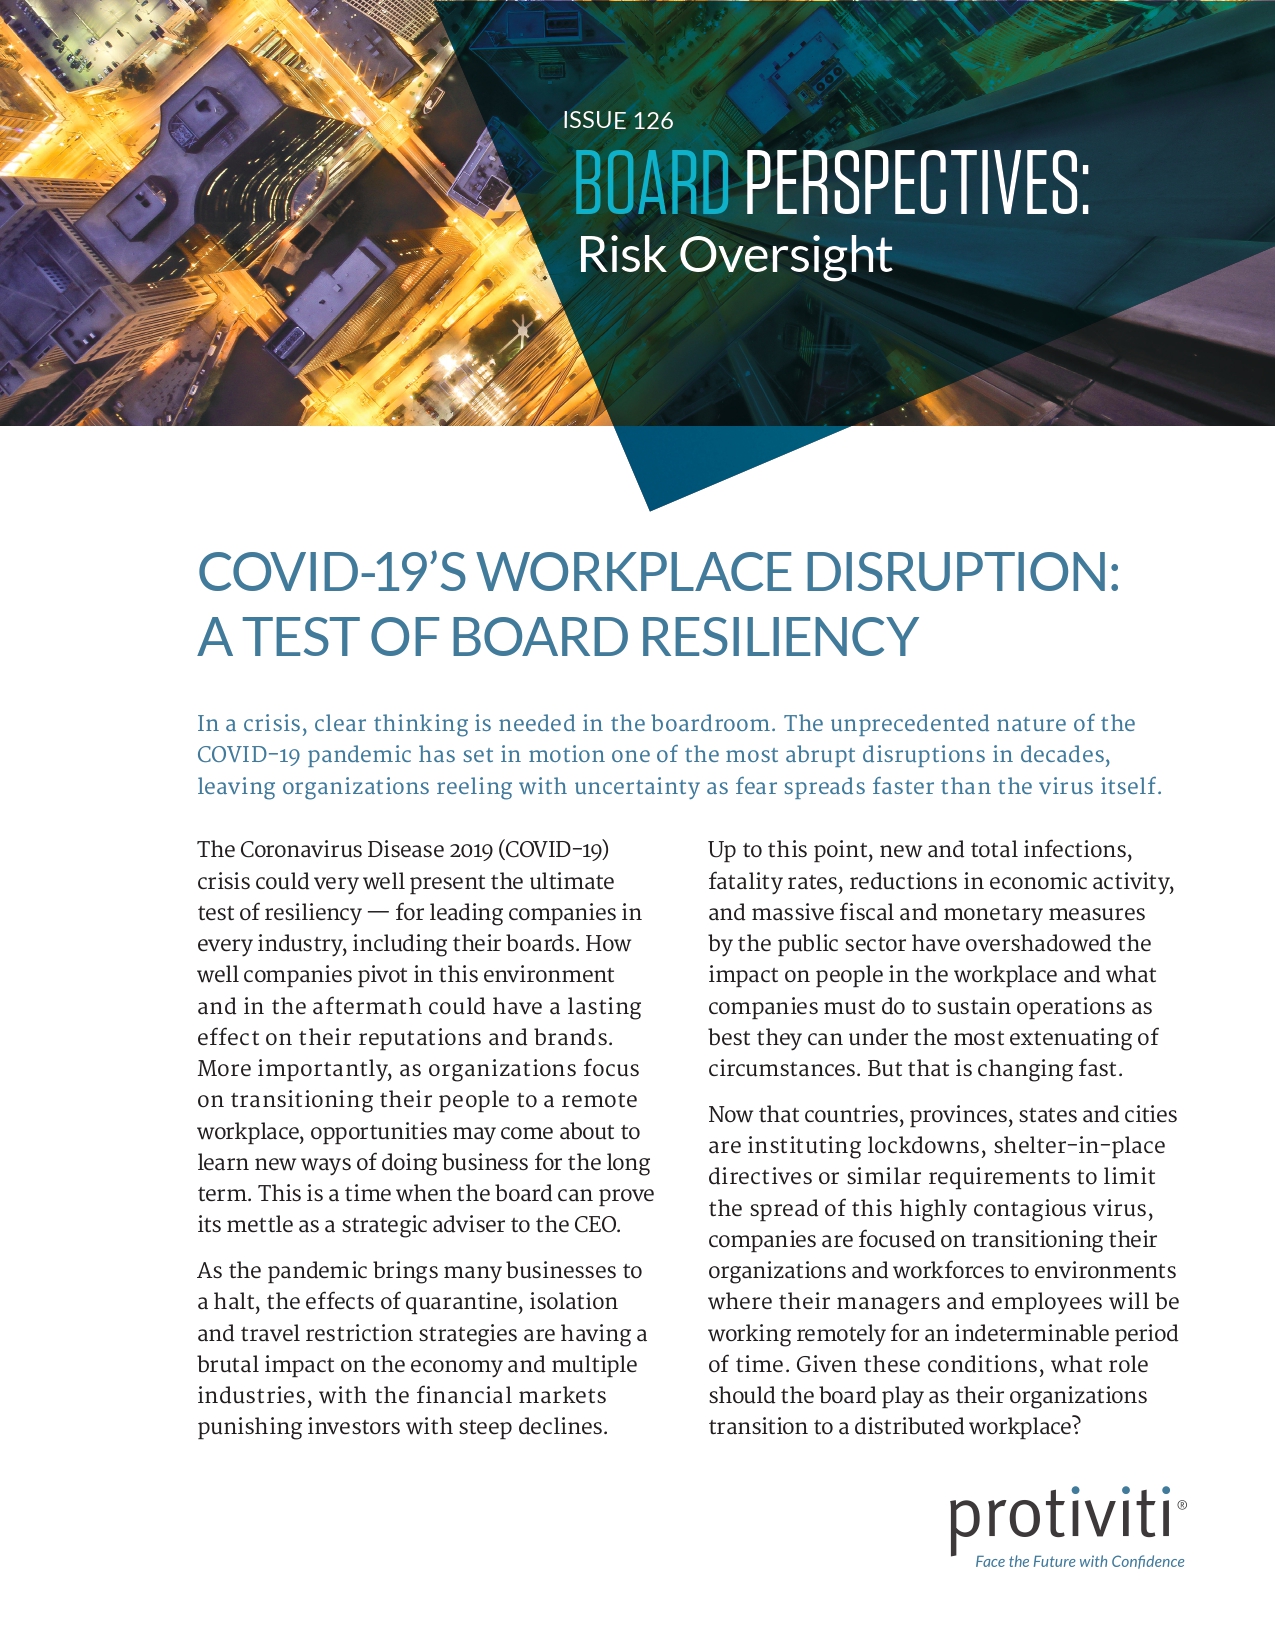 COVID-19’s Workplace Disruption: A Test of Board Resiliency